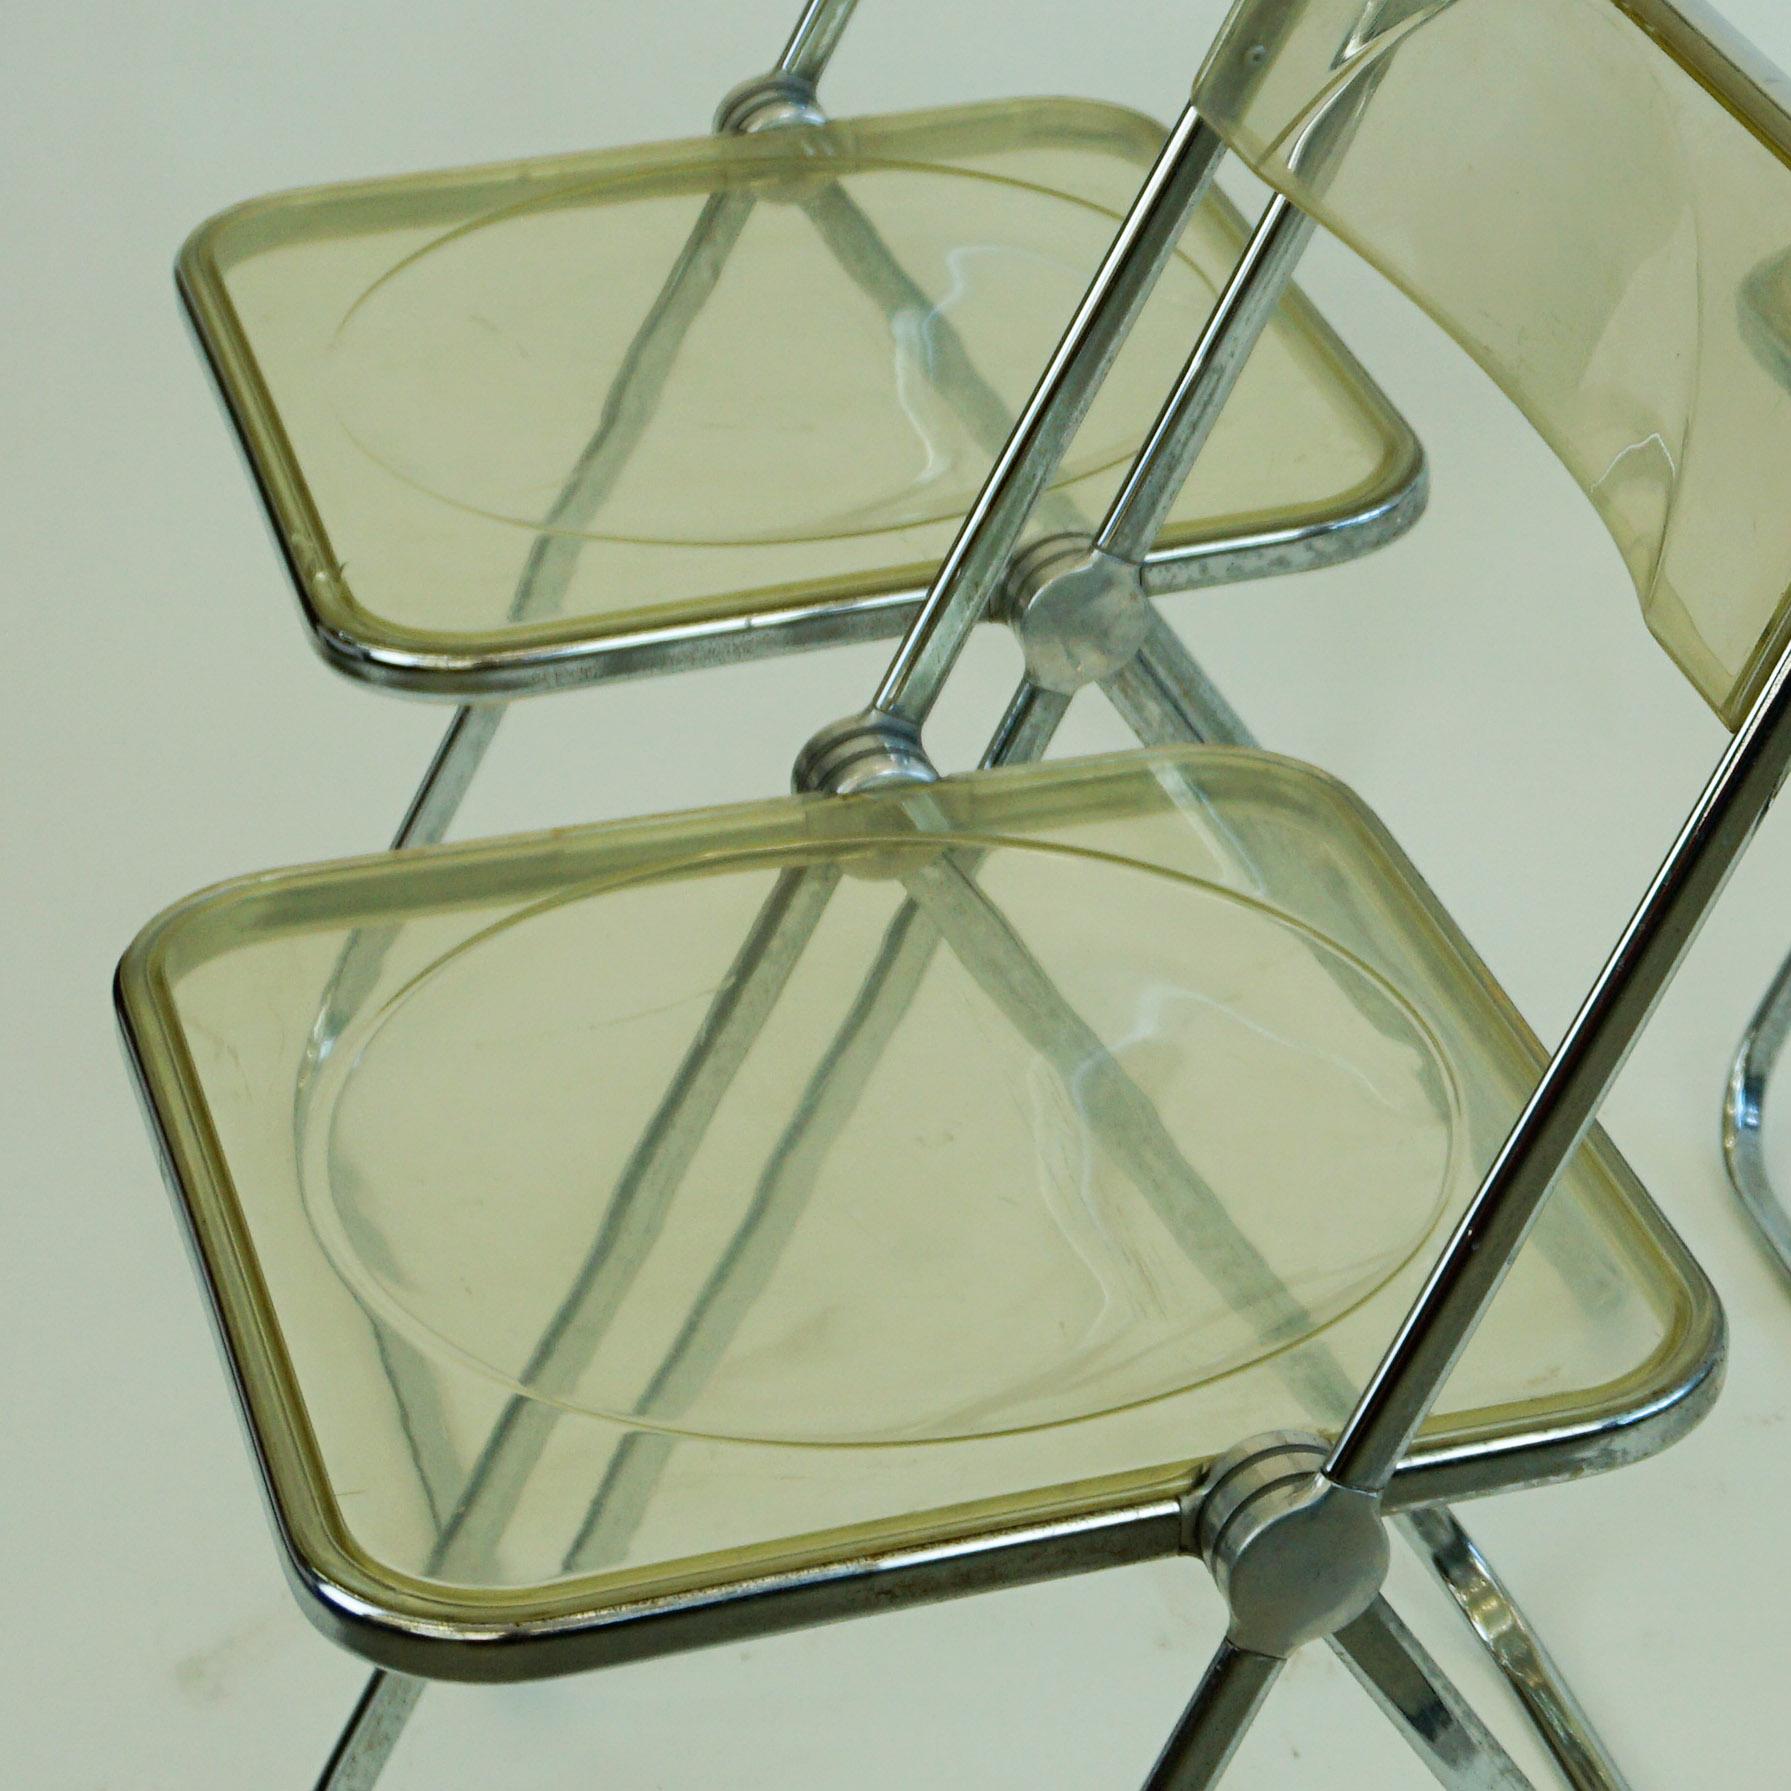 Italian 1960s Chrome and Lucite Plia Folding Chairs by G. Piretti for Castelli 7